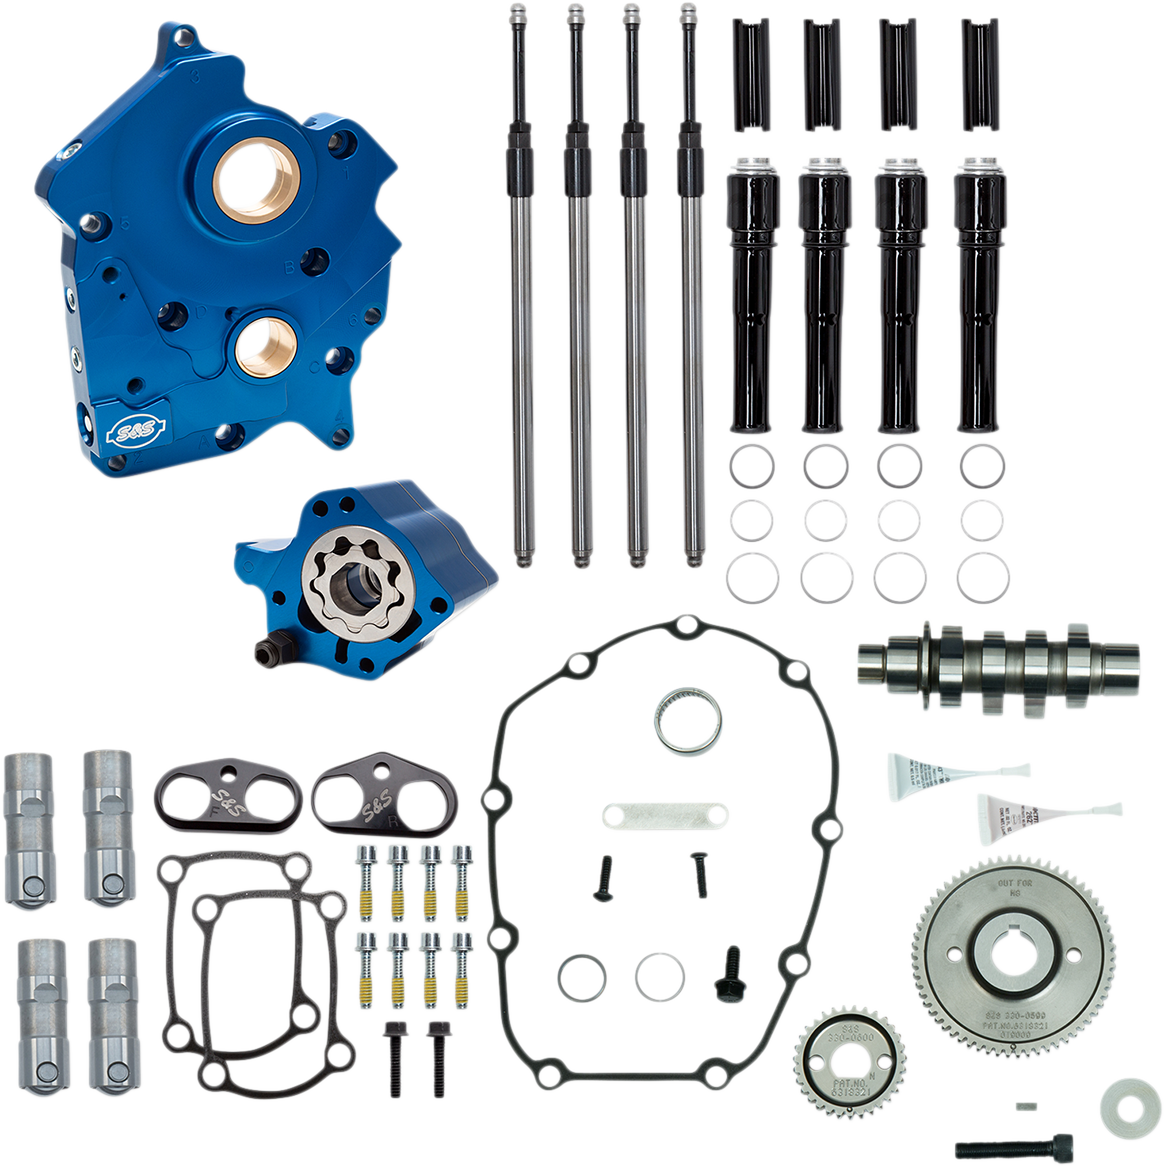 S&S CYCLE Cam Chest Kit with Plate M8 - Gear Drive - Water Cooled - 475 Cam - Black Pushrods 310-1010A